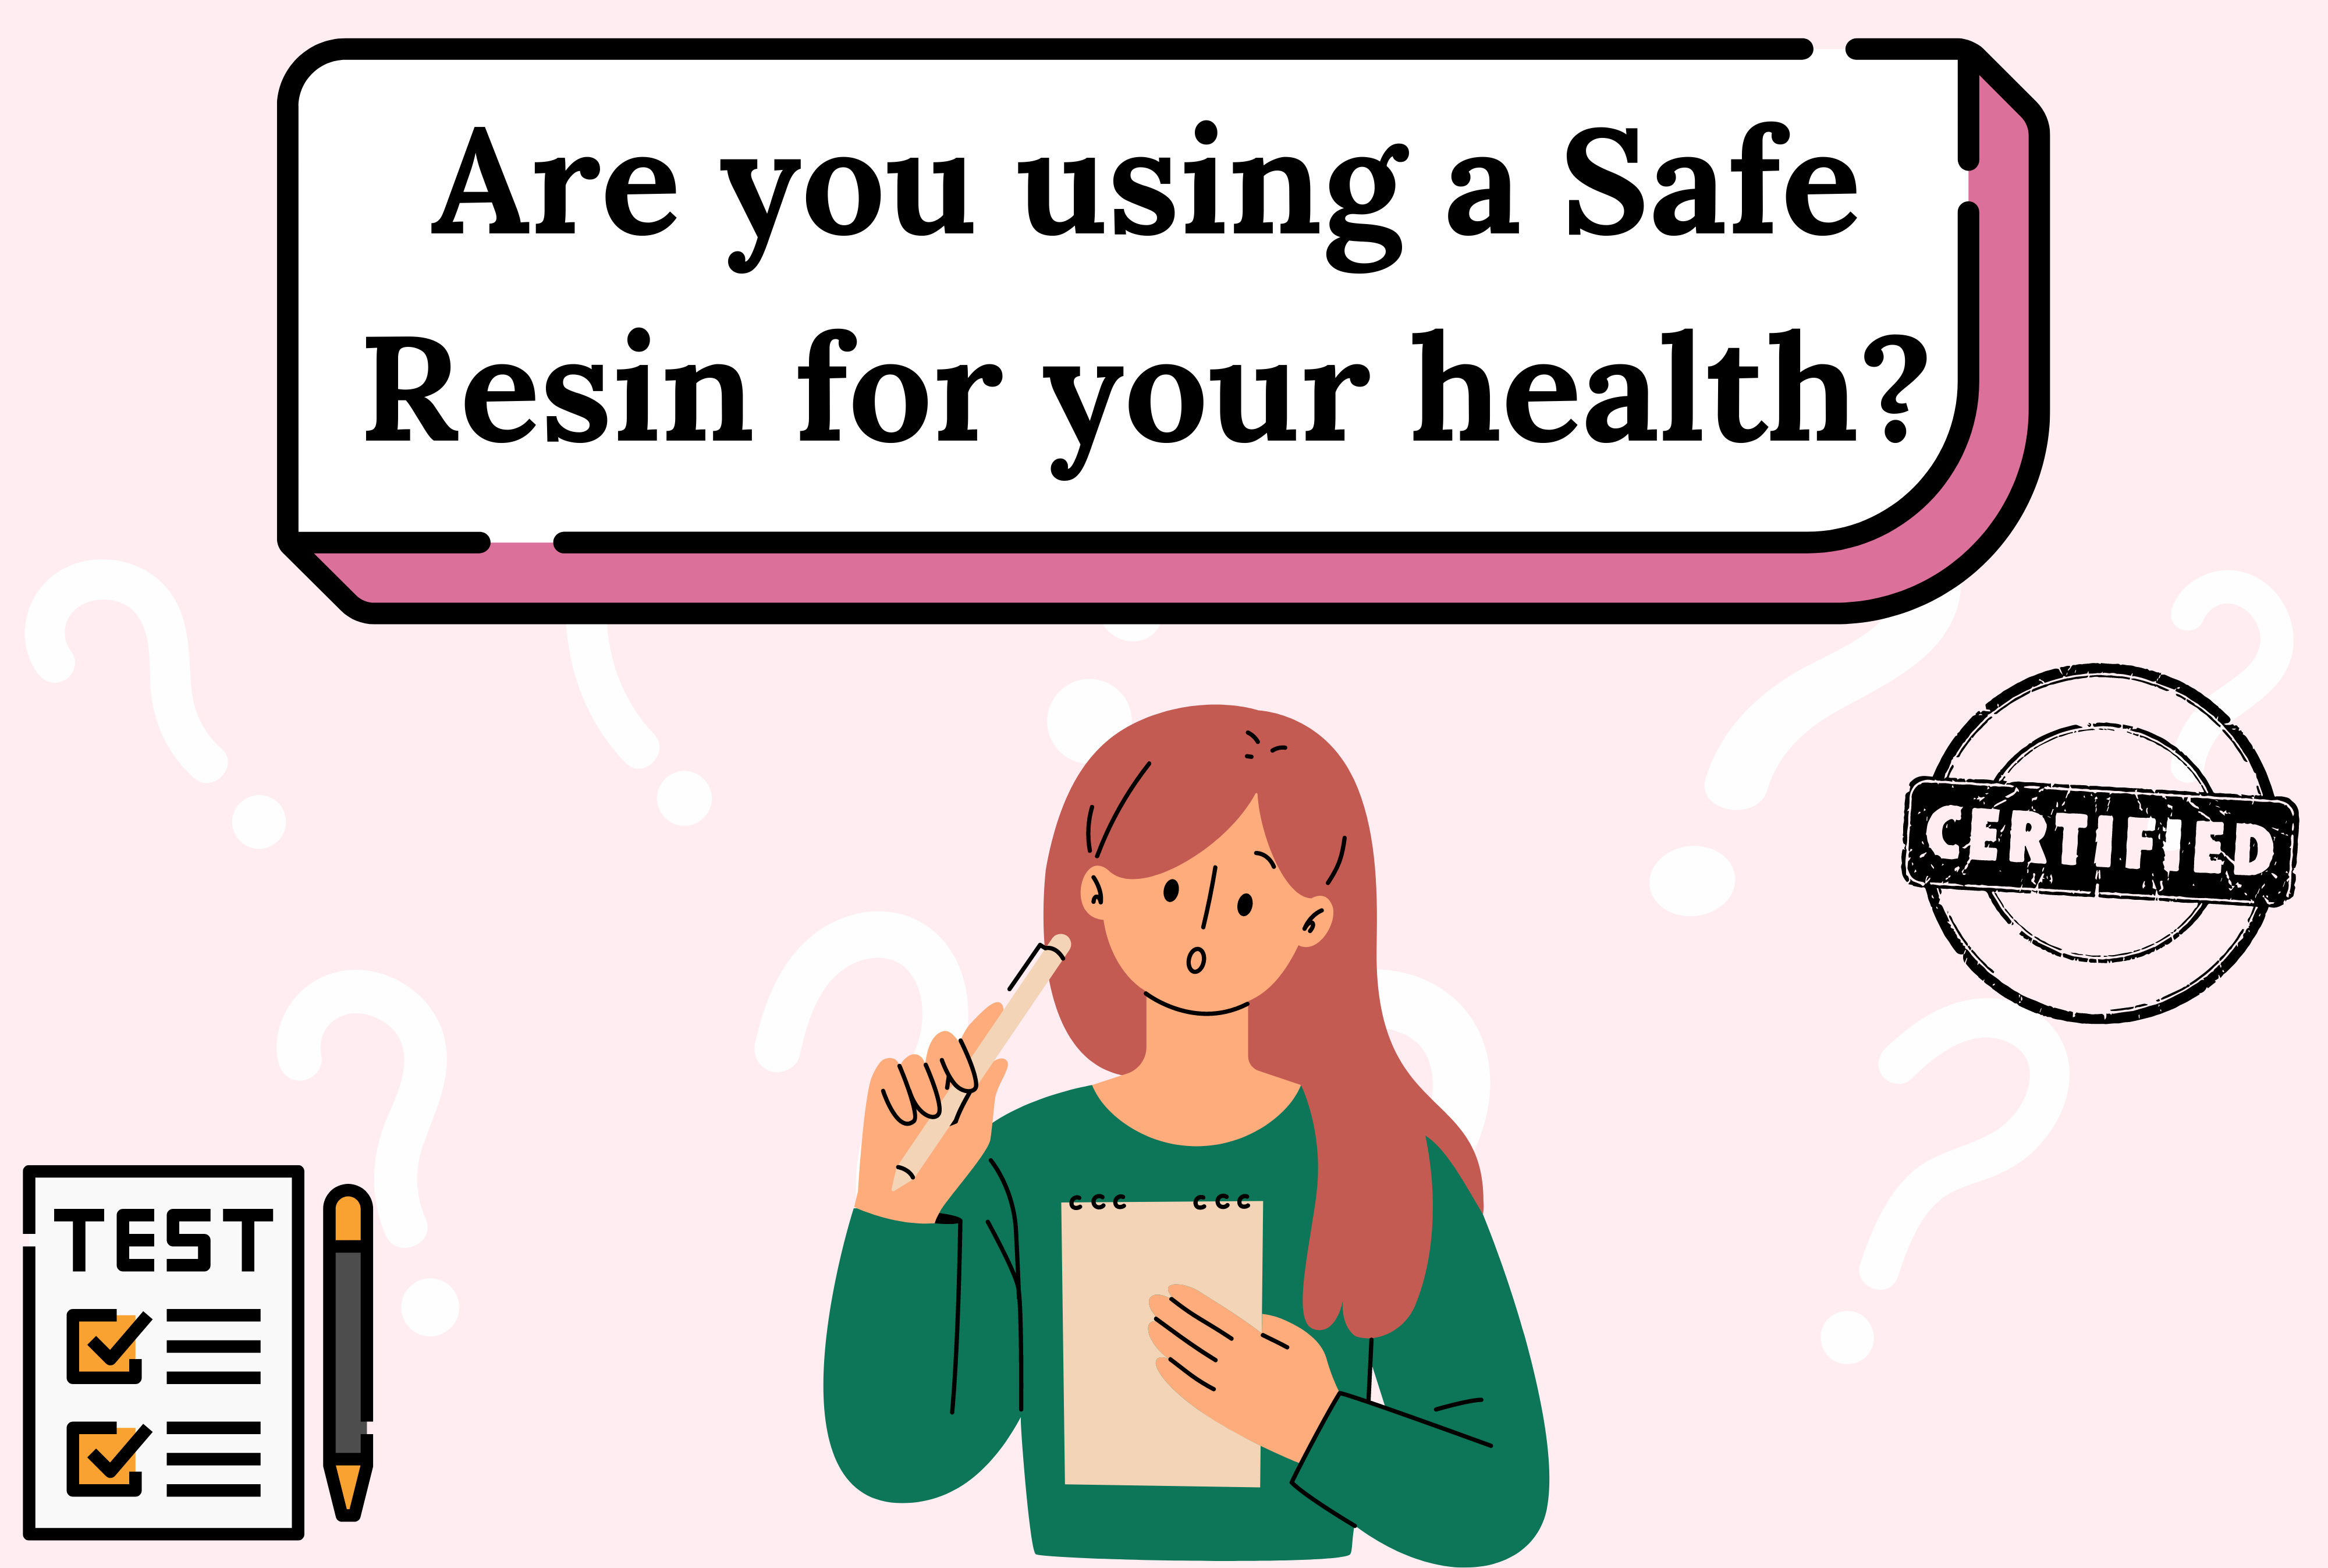 Are you using a Safe Resin for your health?